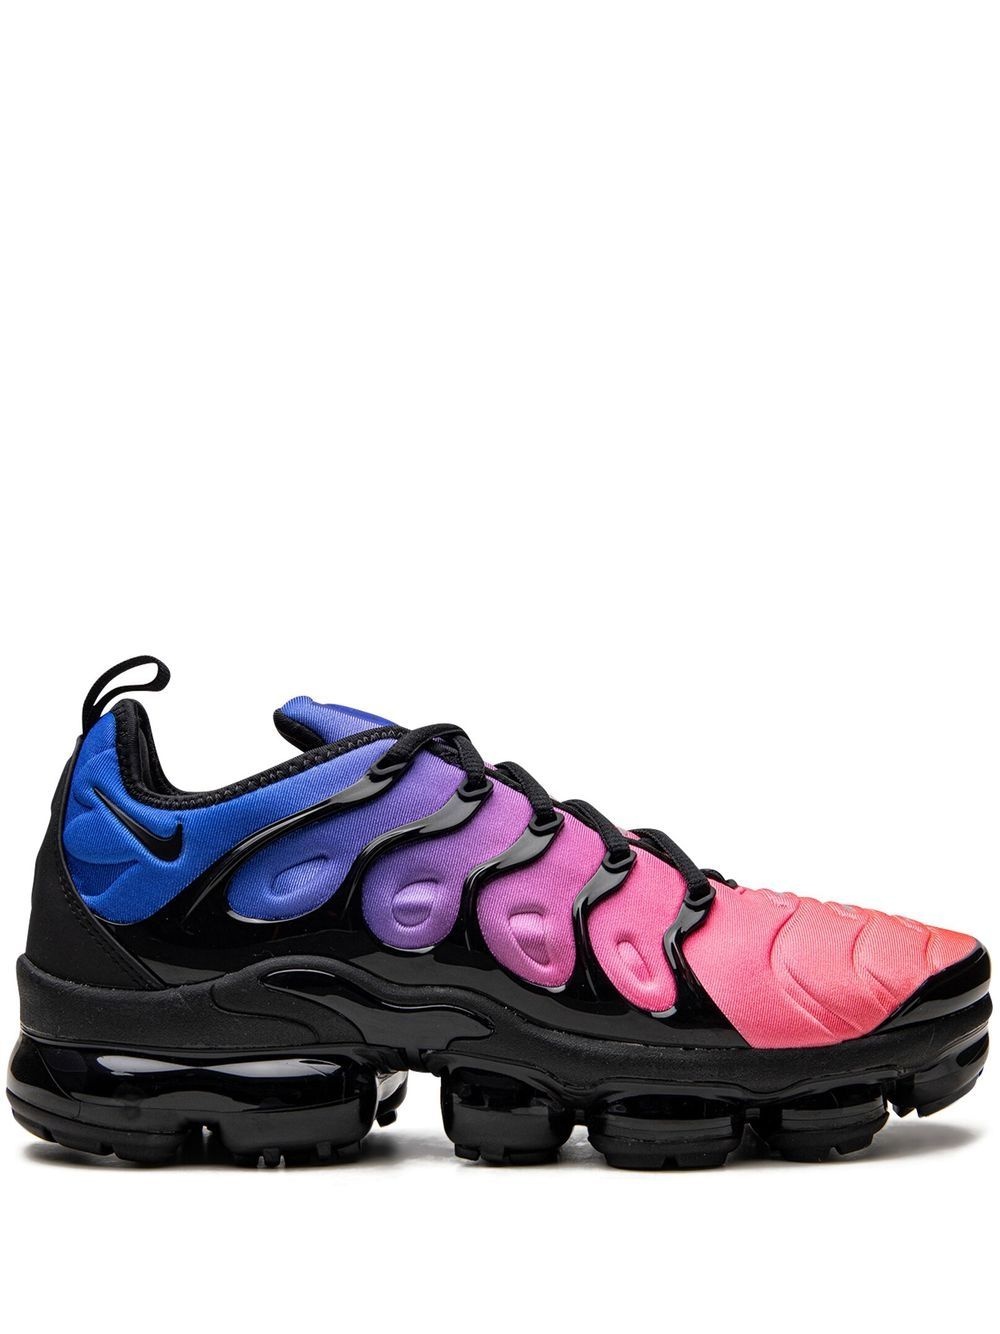 Air Vapormax Plus "Cotton Candy" sneakers - 1